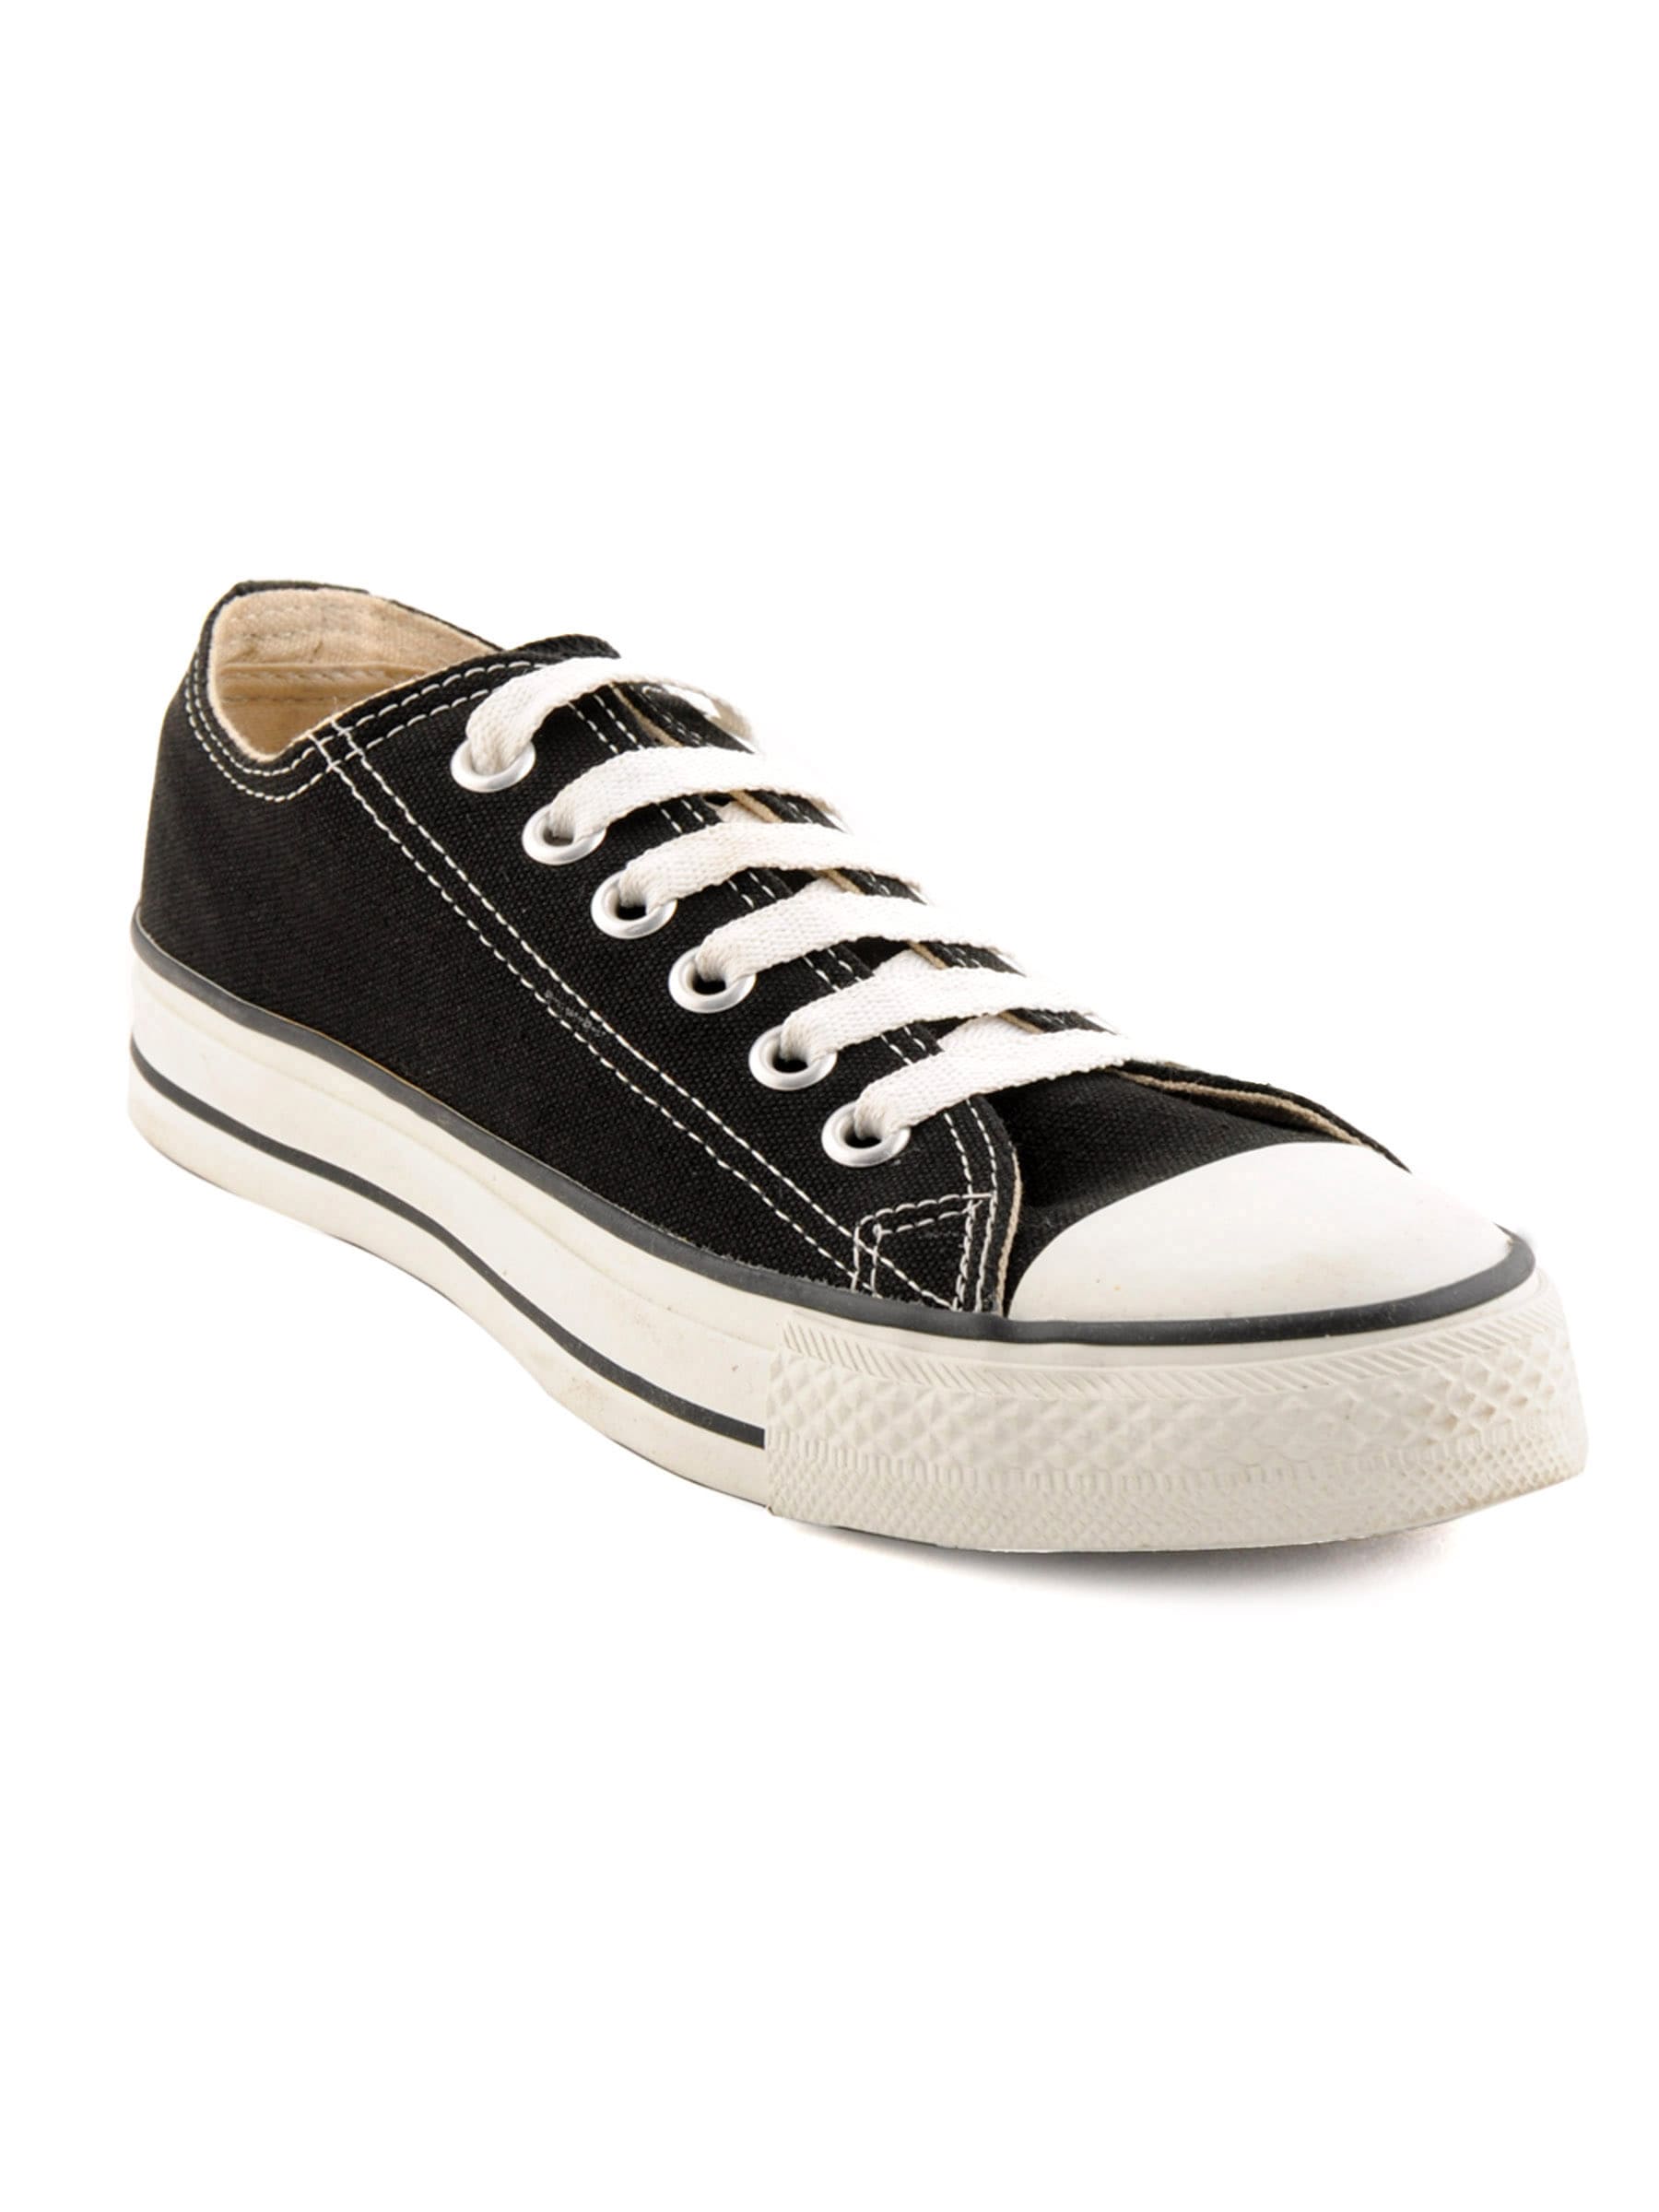 Converse Unisex AS Canvas OX Black Casual Shoes